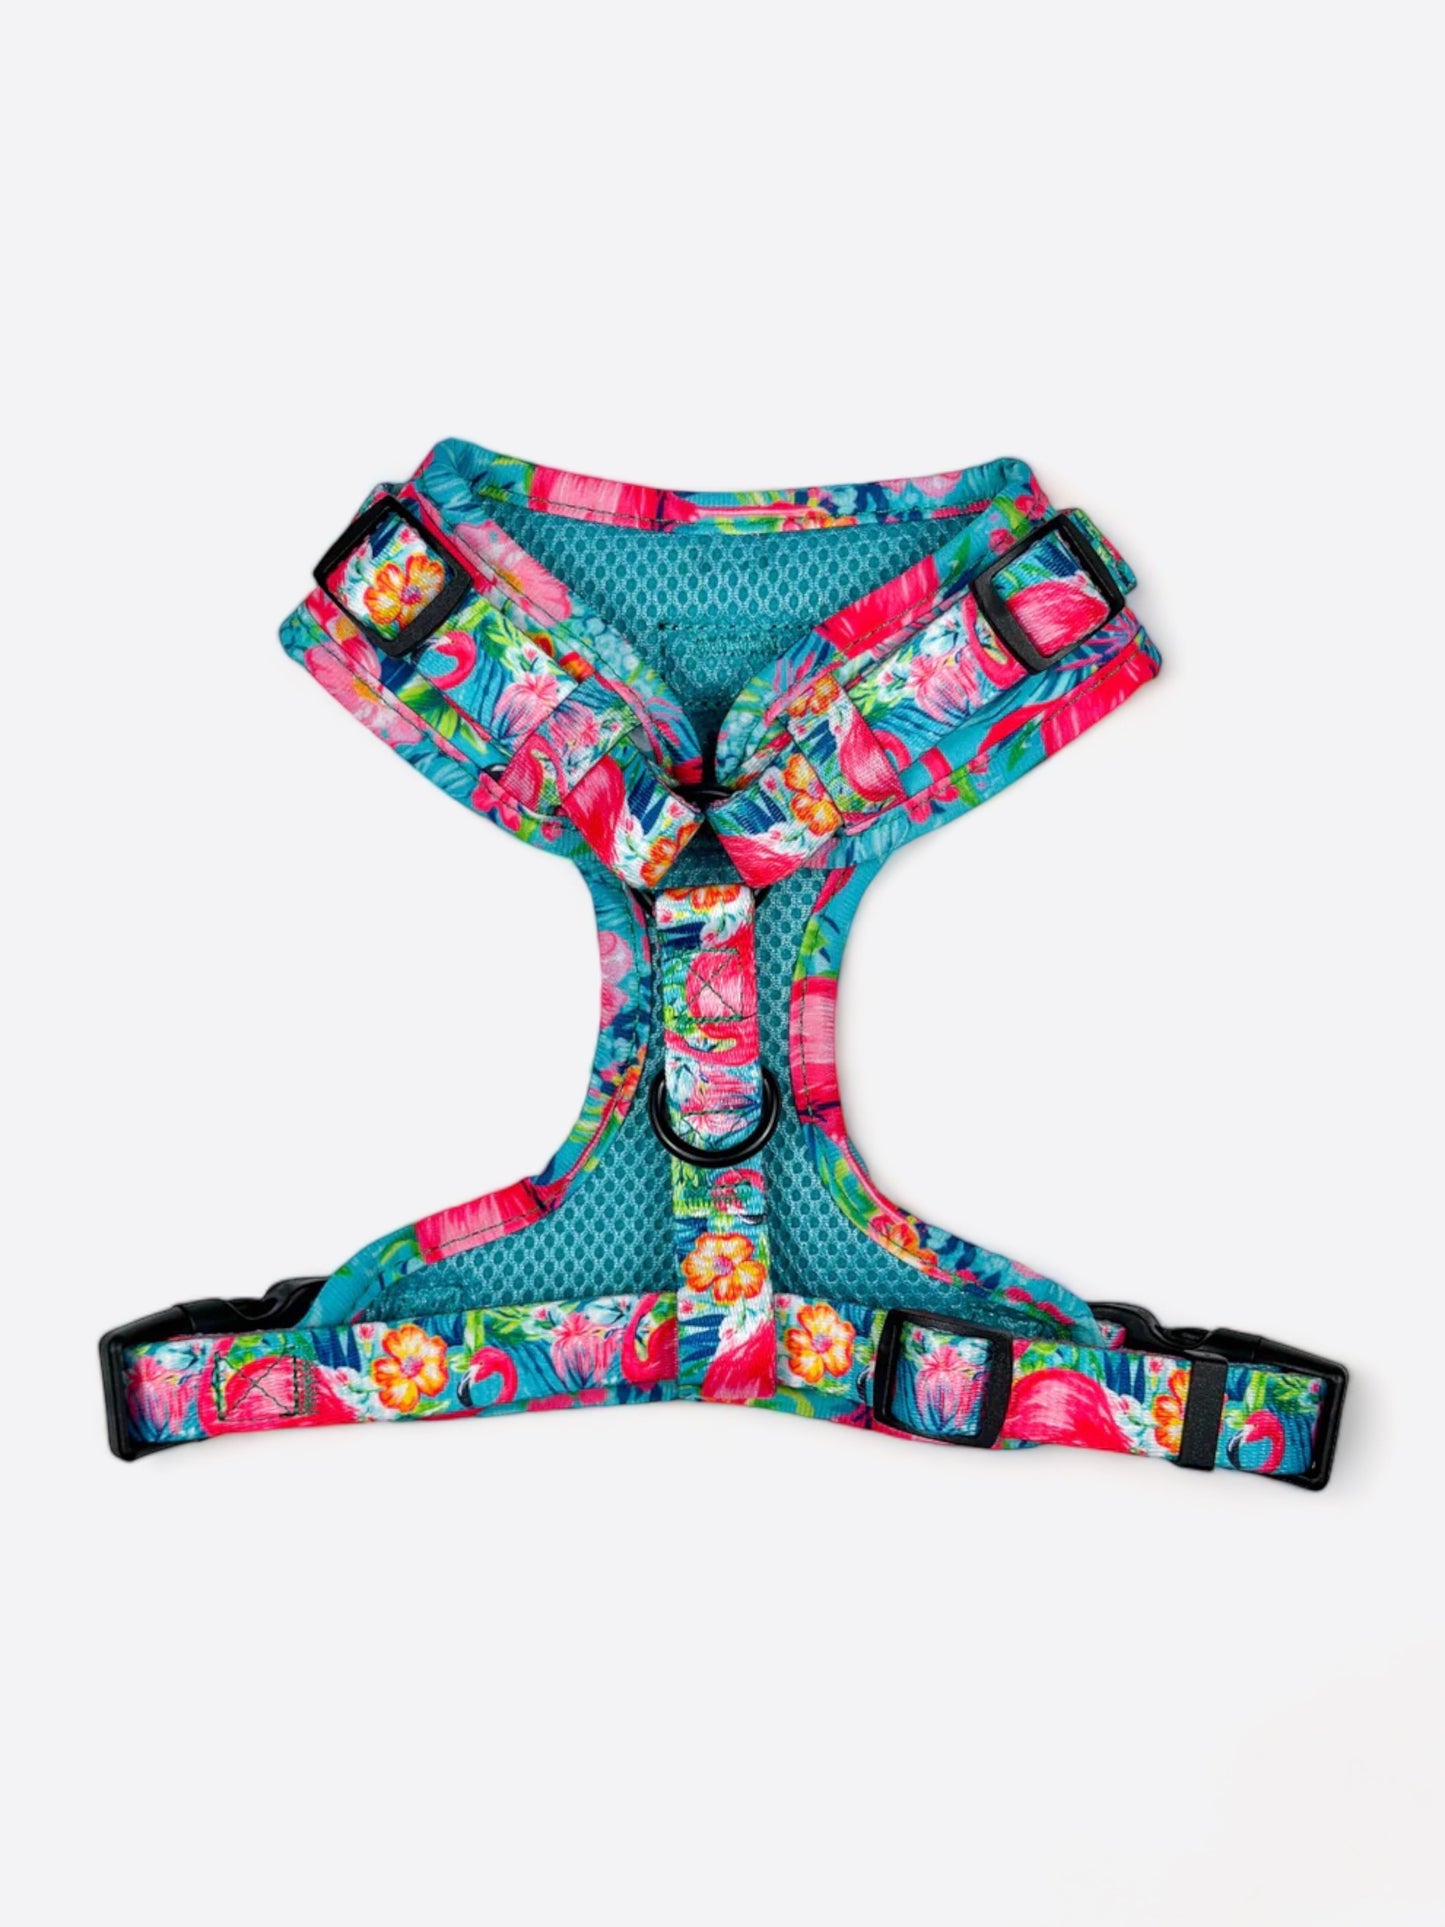 The Tropical Pawradise Adjustable Harness